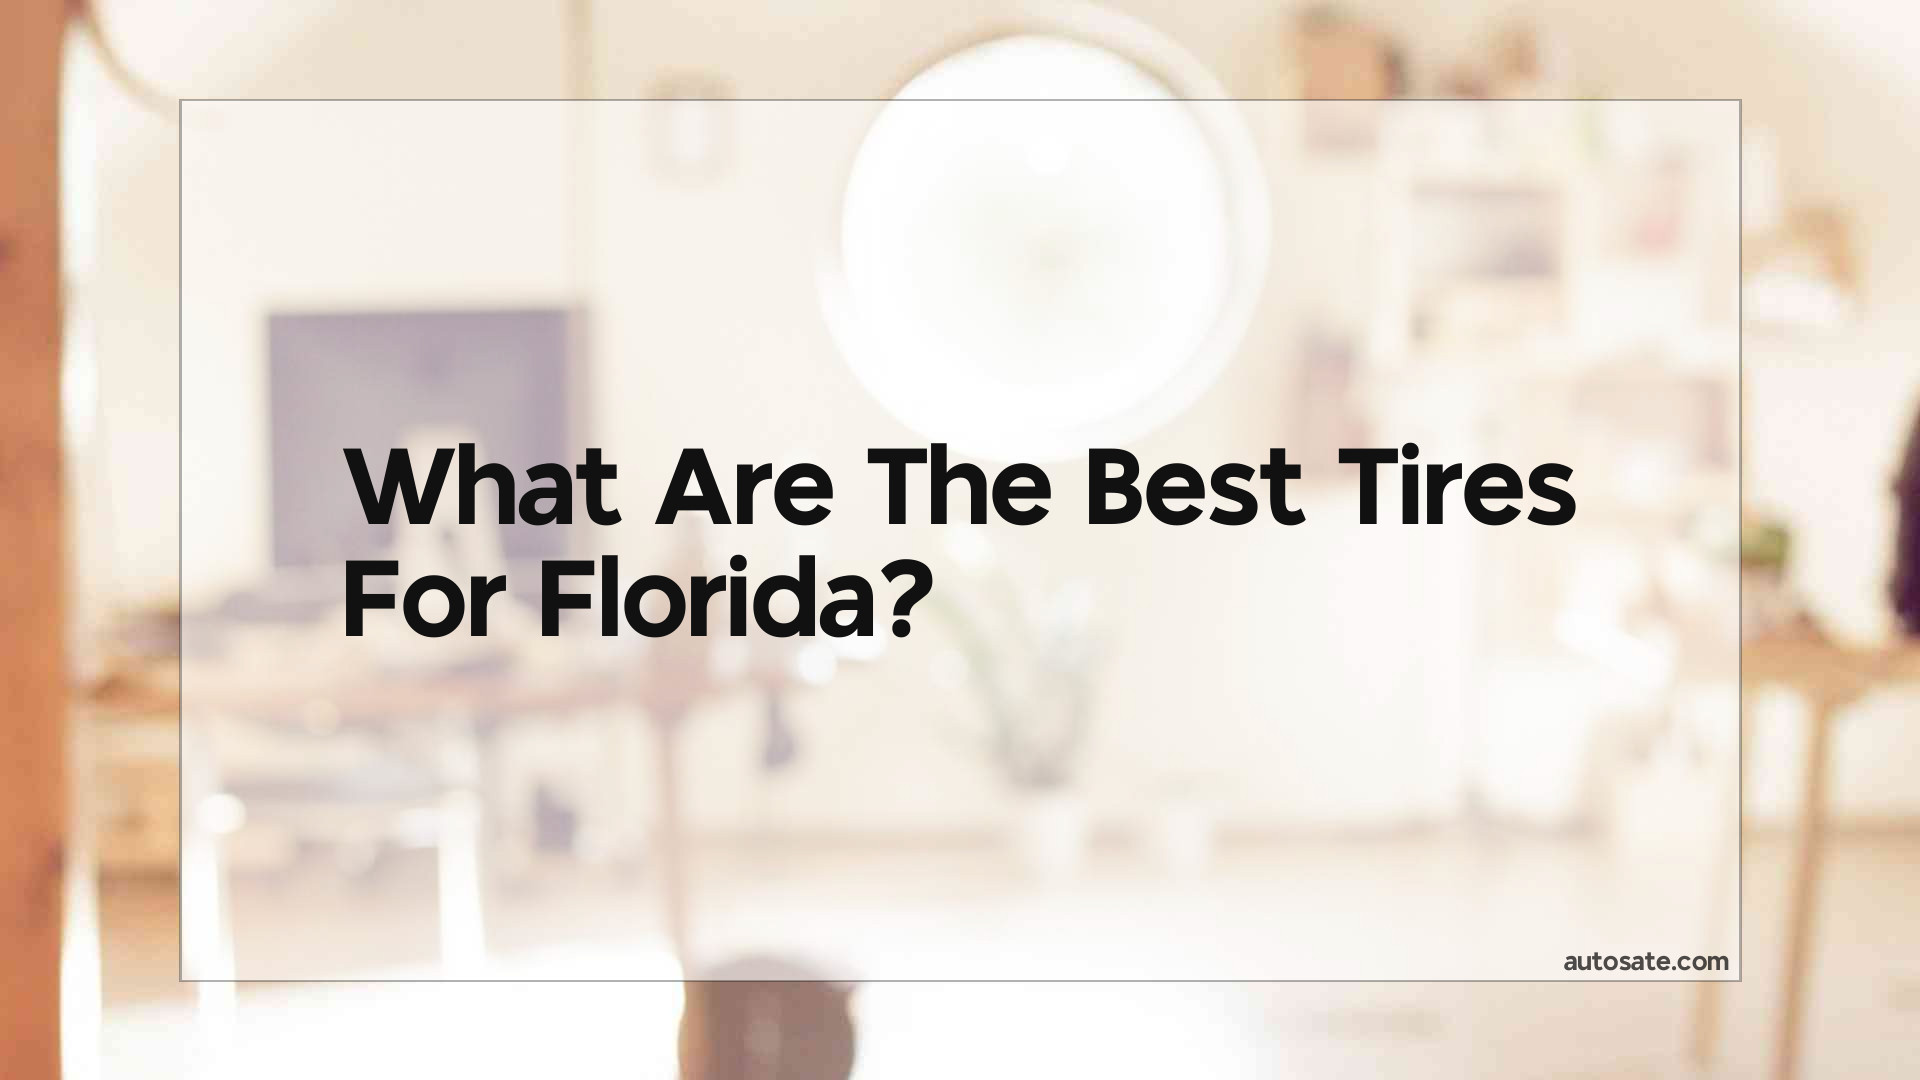 What Are The Best Tires For Florida